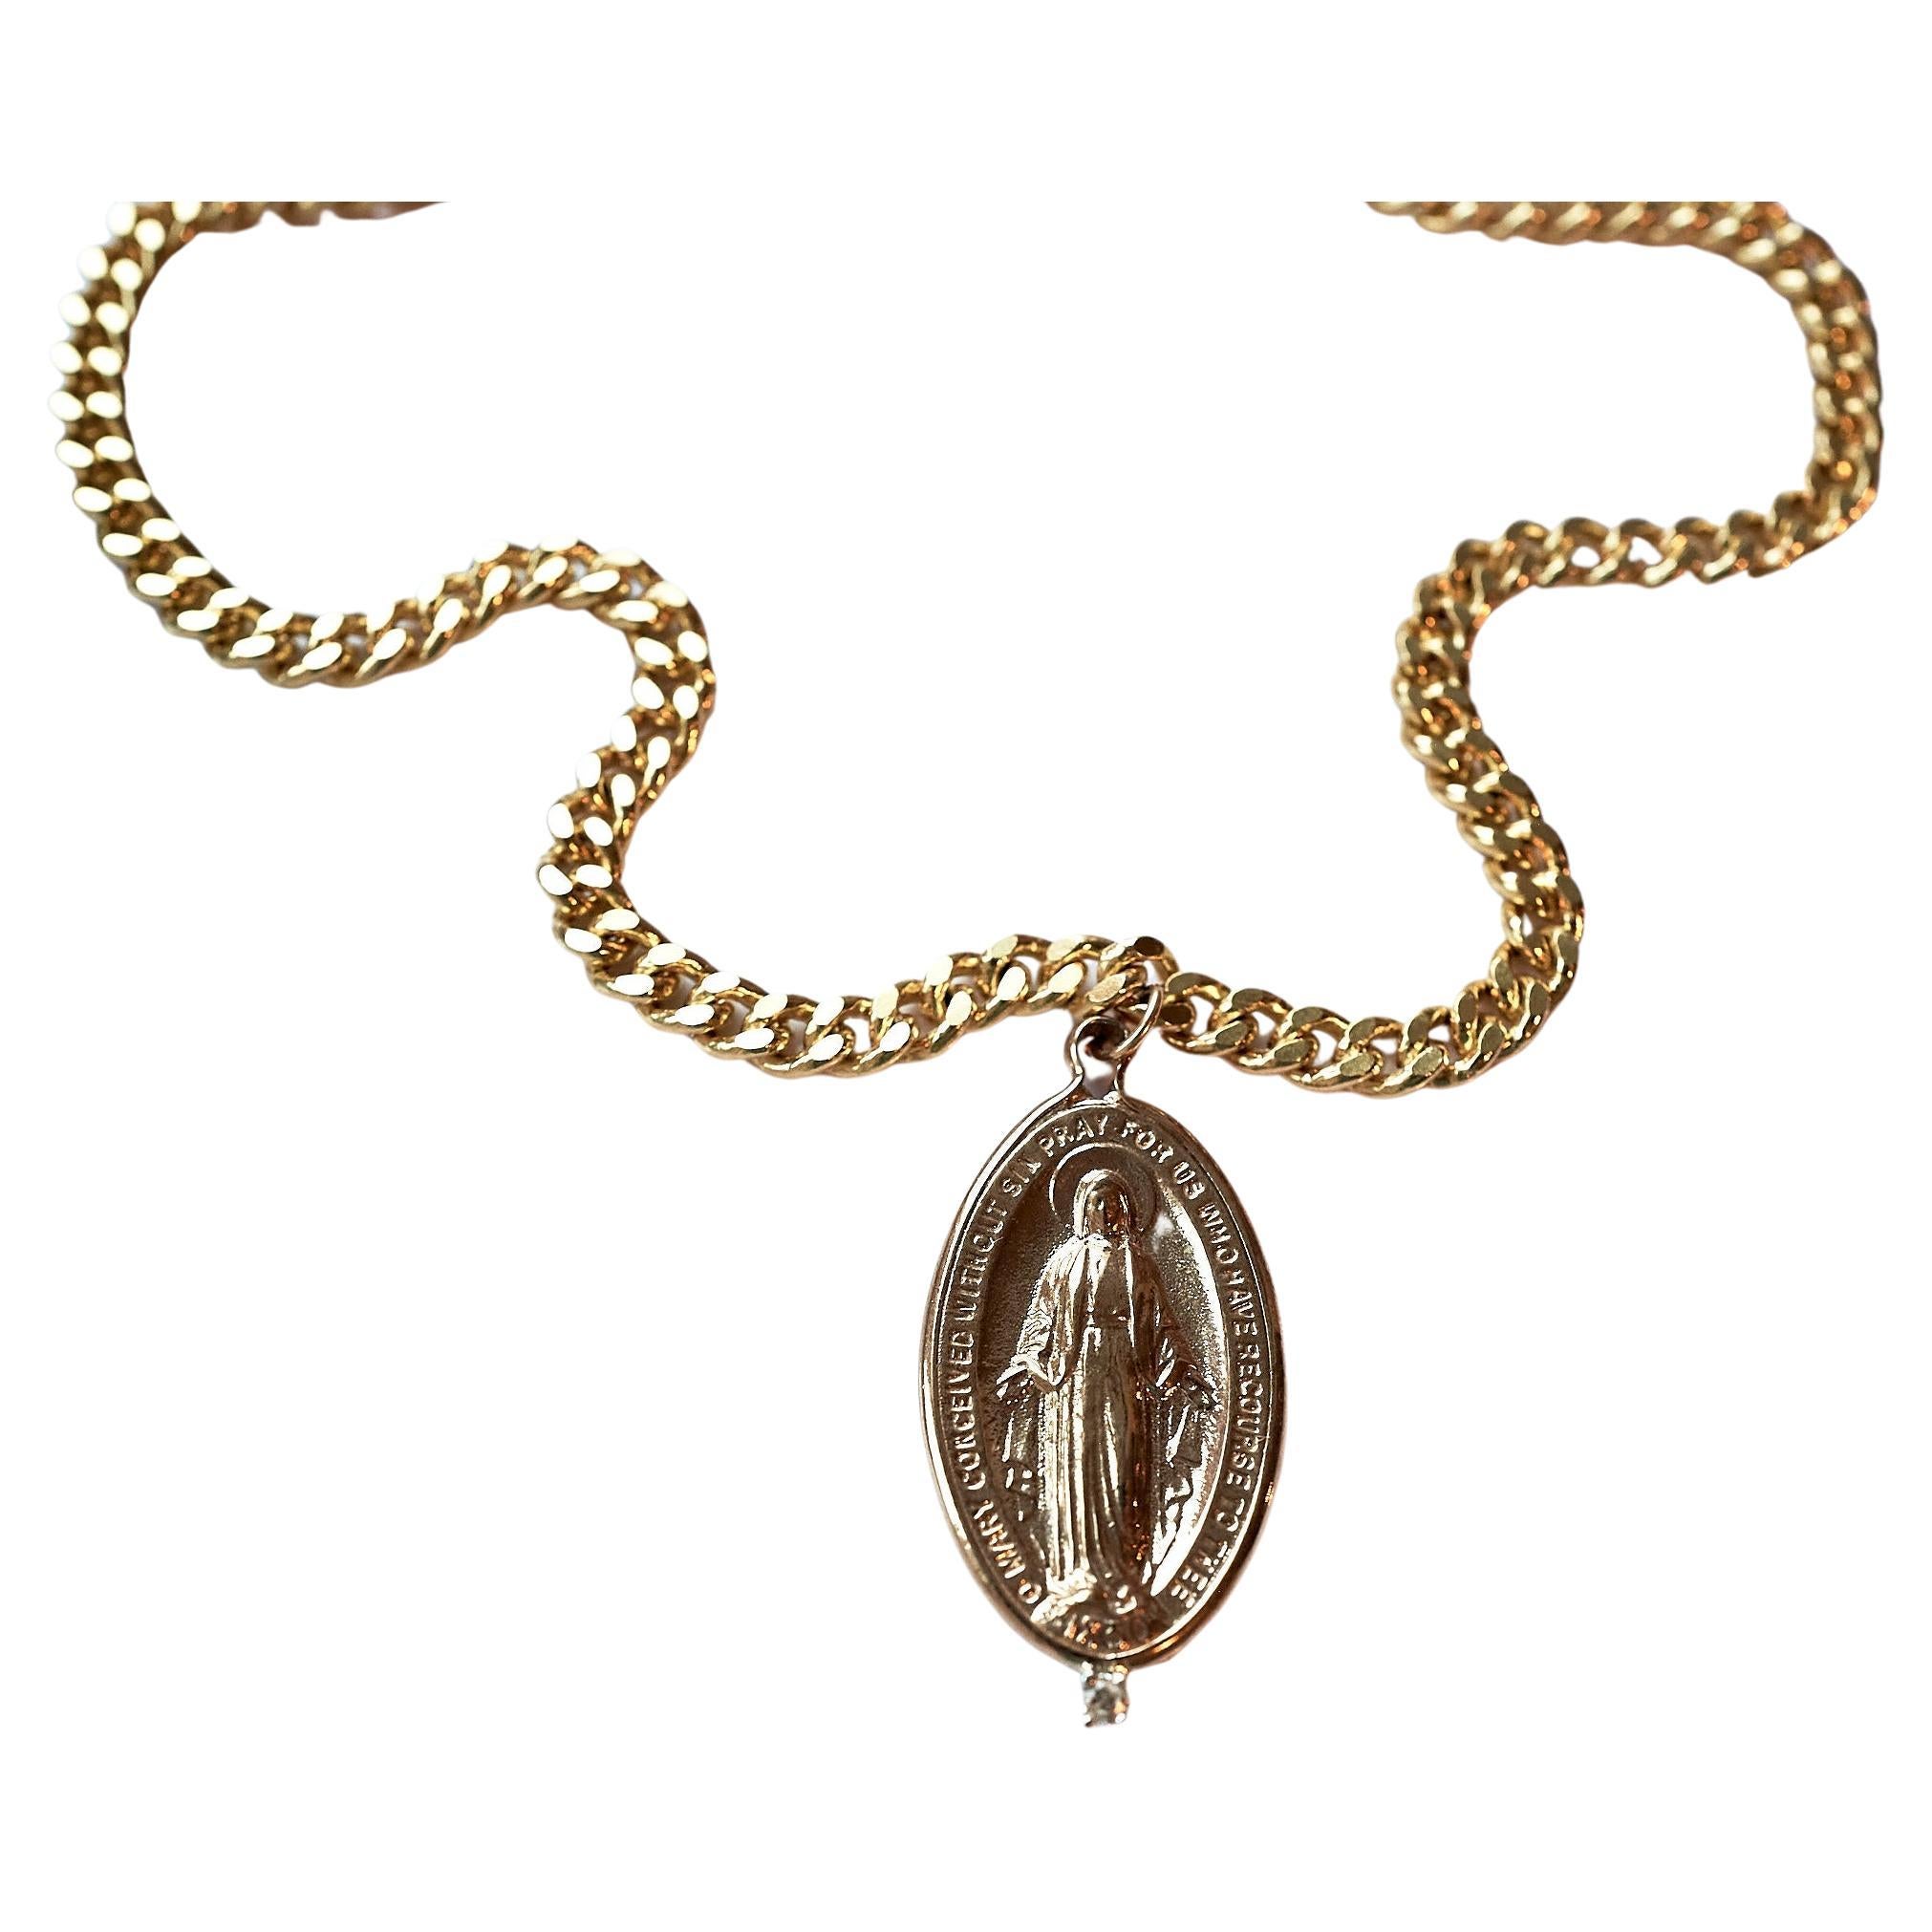 Contemporary White Diamond Medal Virgin Mary Oval Medal Chain Necklace J Dauphin For Sale